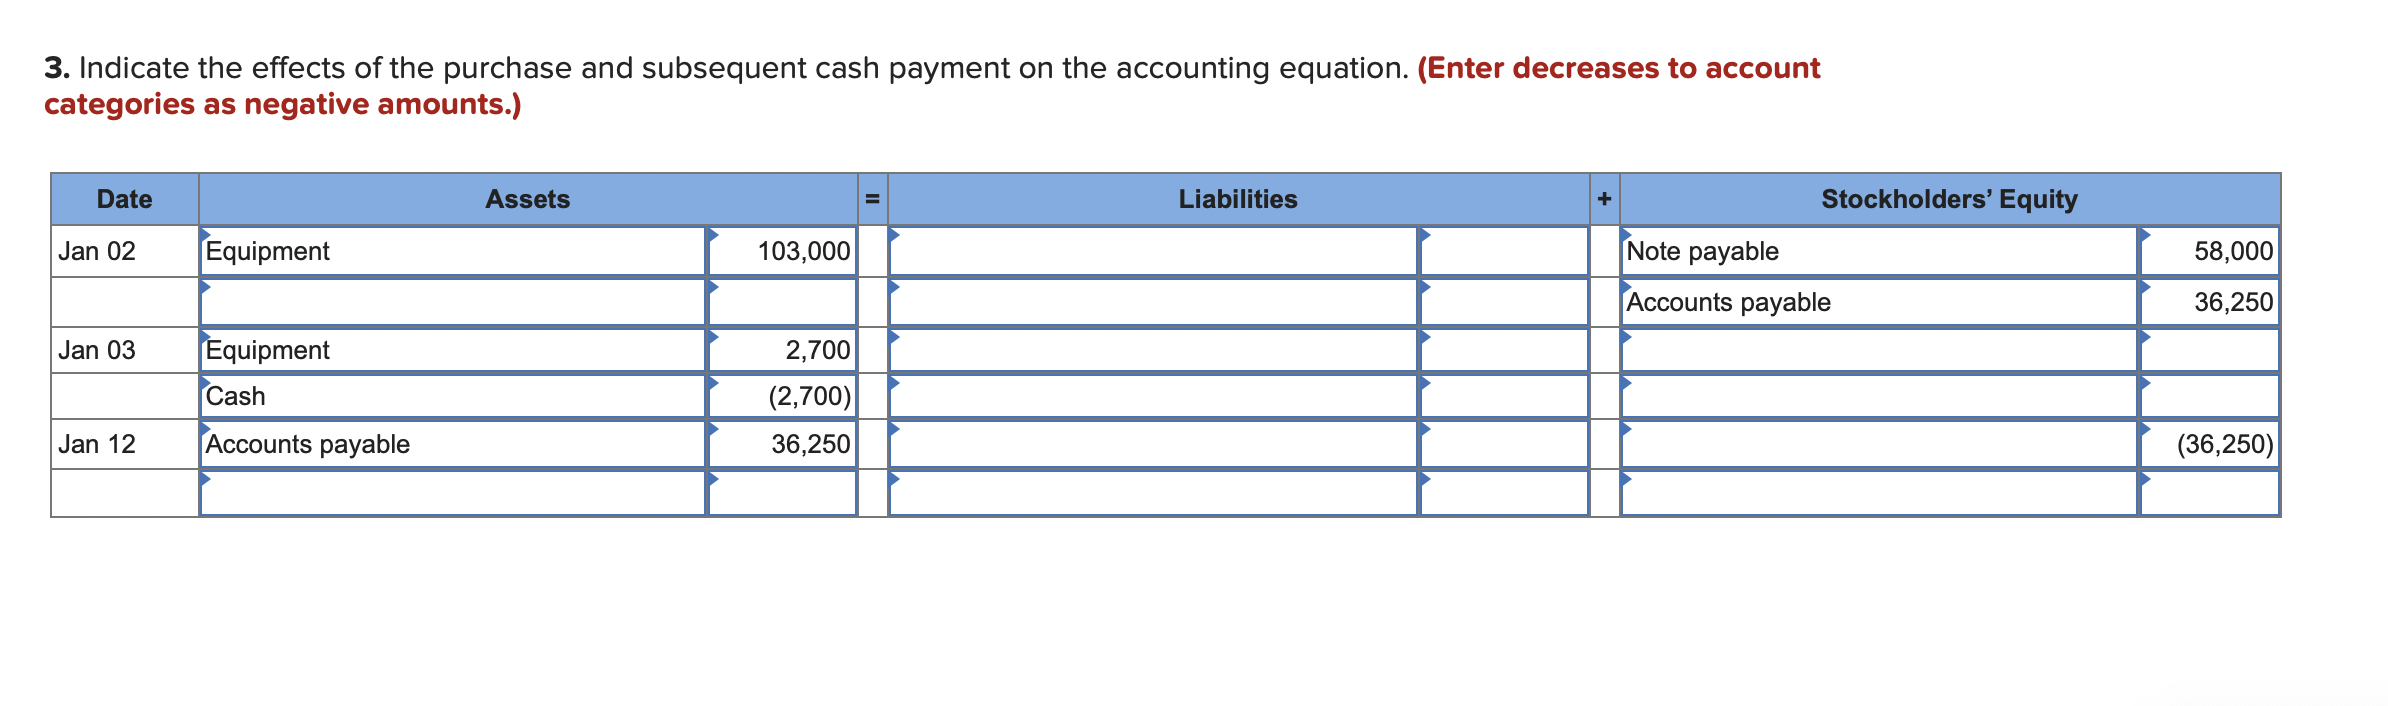 3. Indicate the effects of the purchase and subsequent cash payment on the accounting equation. (Enter decreases to account c